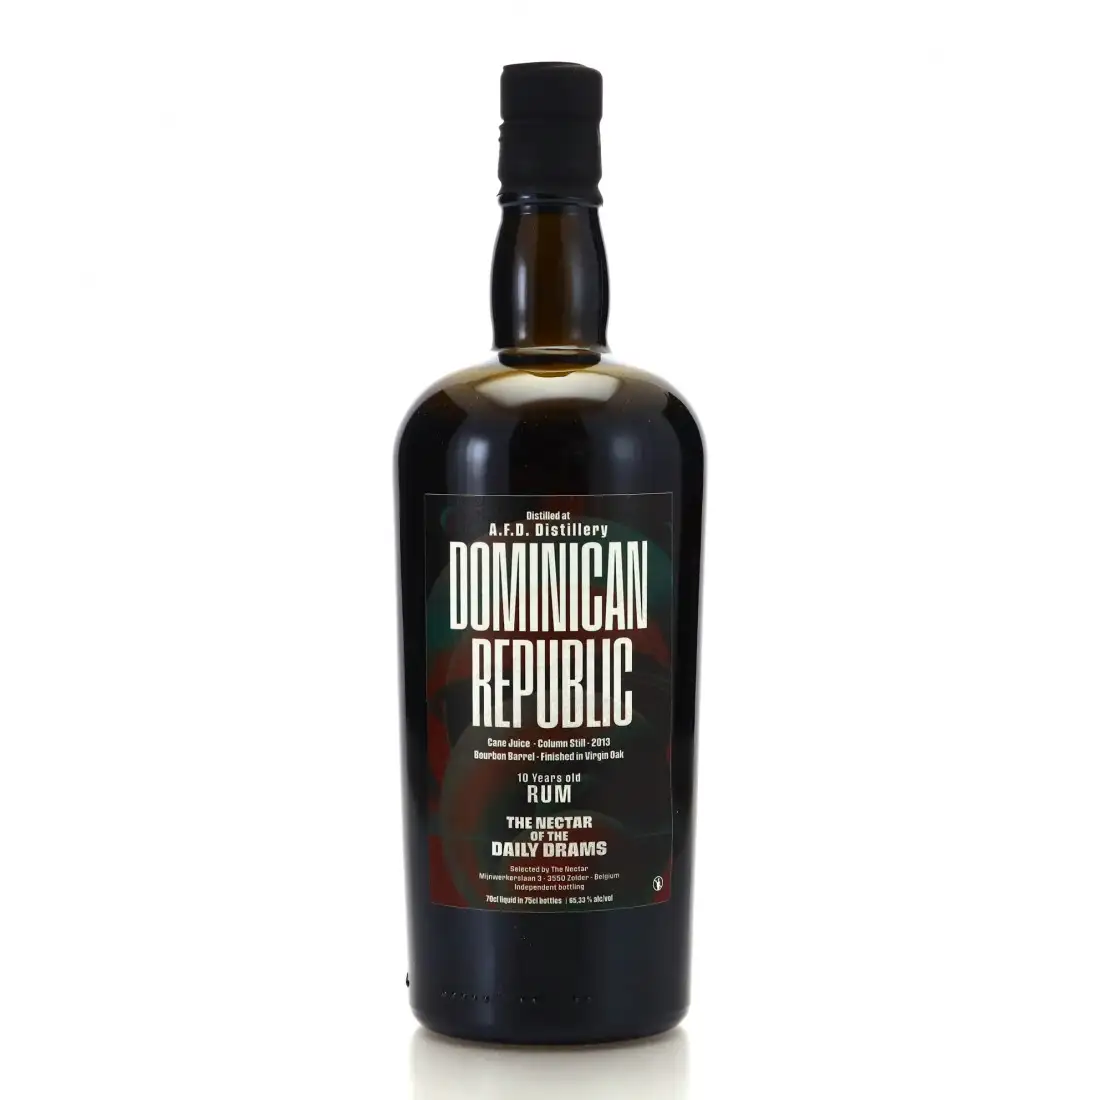 Image of the front of the bottle of the rum The Nectar Of The Daily Drams Dominican Republic